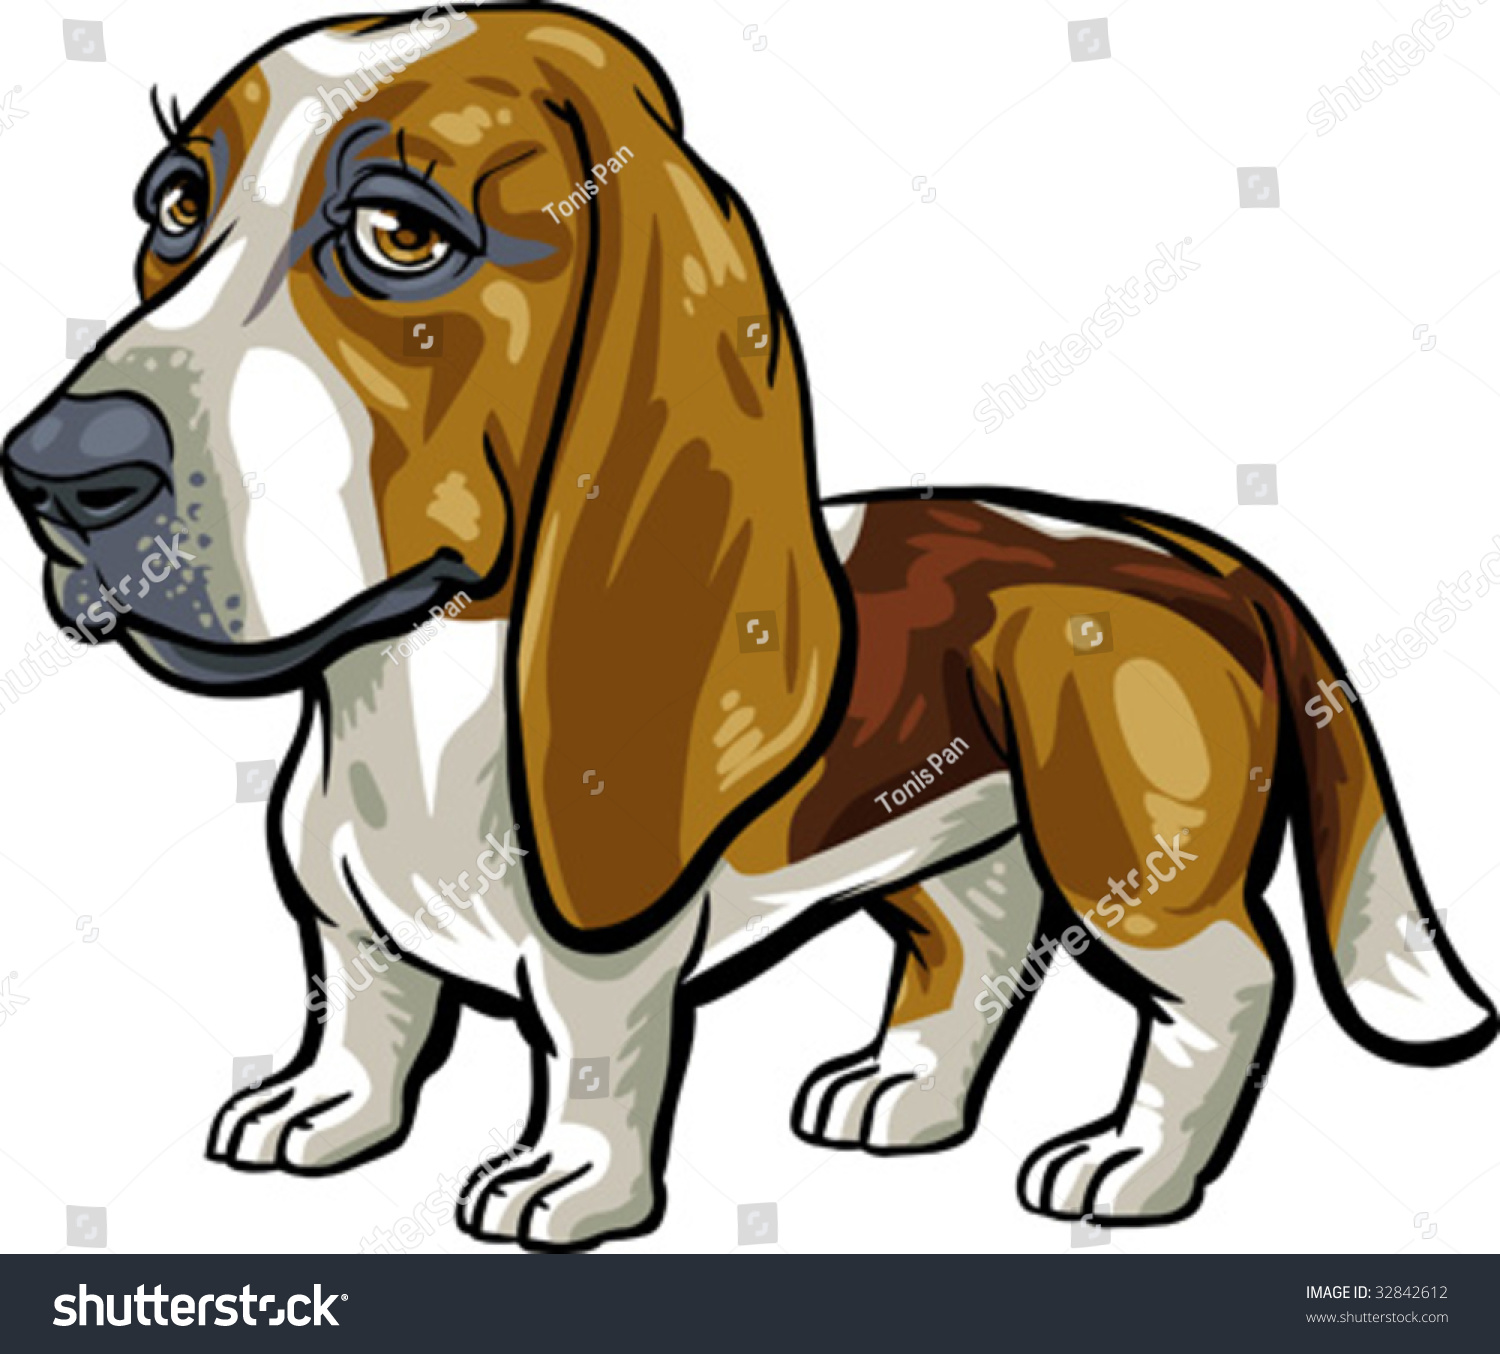 space dog clipart - photo #40